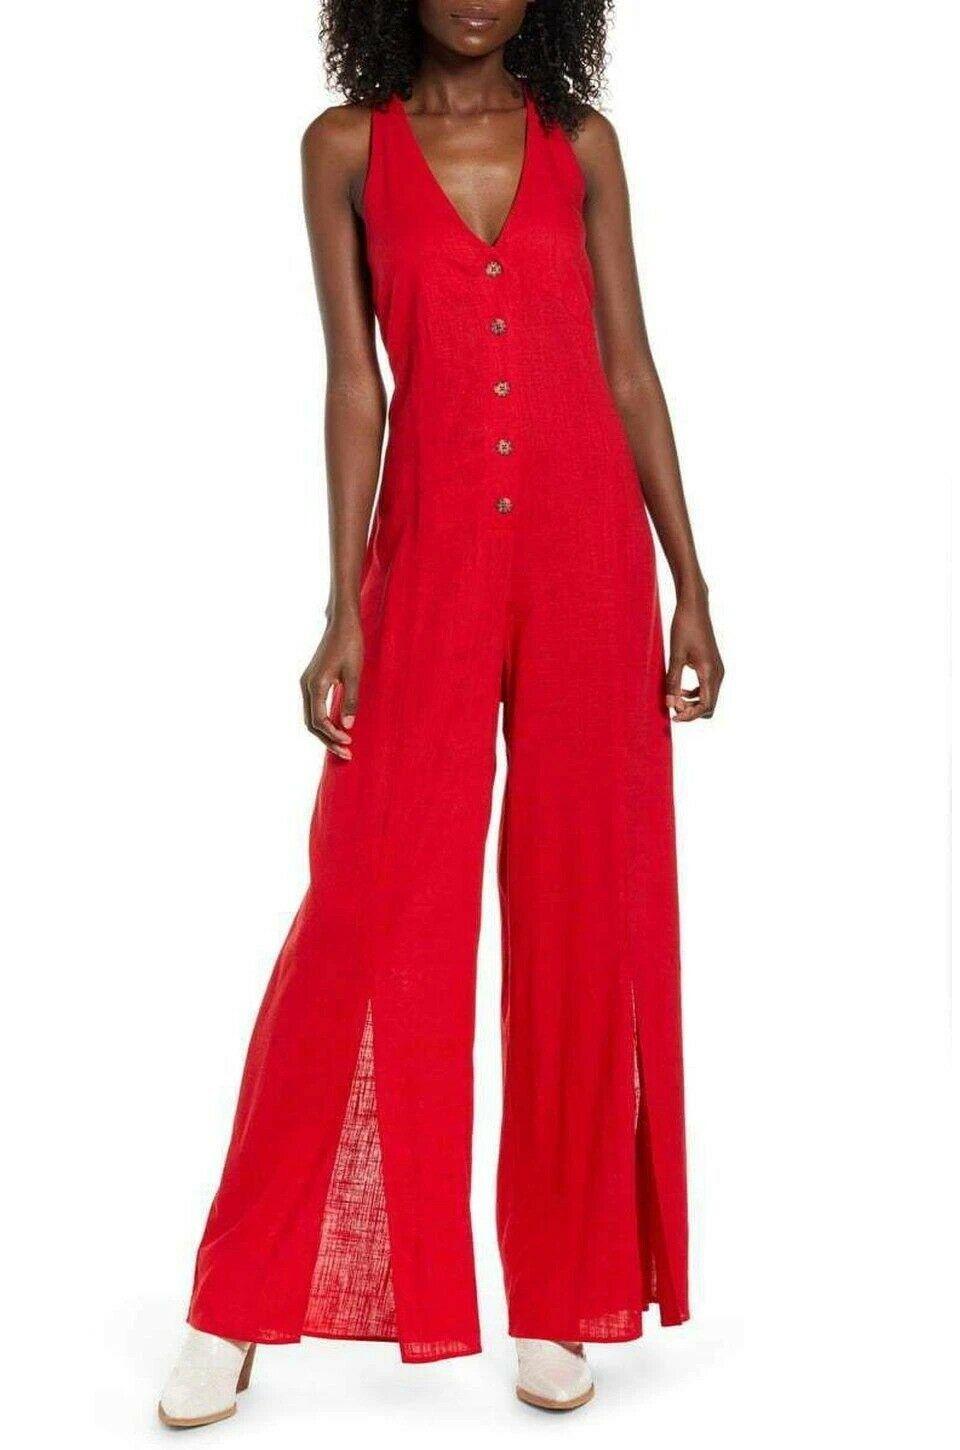 Band of Gypsies Manila Linen Blend Jumpsuit With Split Leg In Red Size M - SVNYFancy